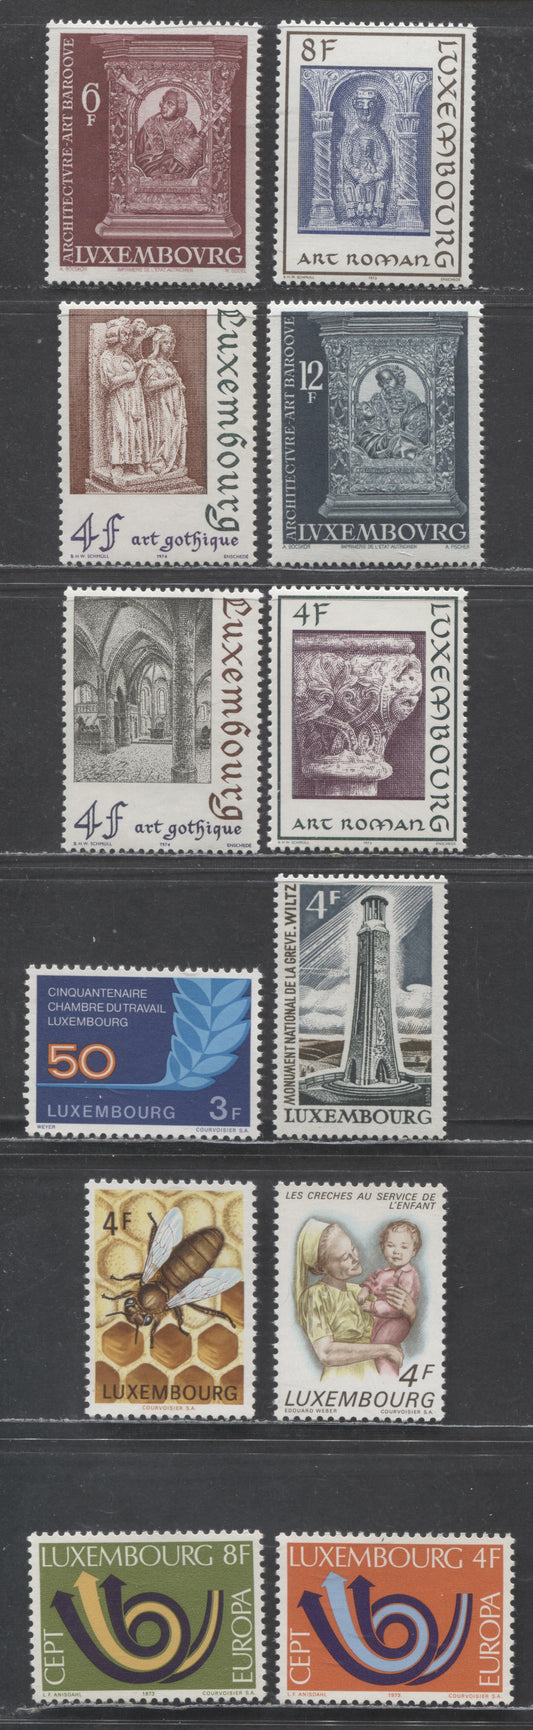 Luxembourg SC#523/538 1973 Europa & Architecture Issues, 12 VFNH Singles, Click on Listing to See ALL Pictures, 2022 Scott Classic Cat. $6.3 USD